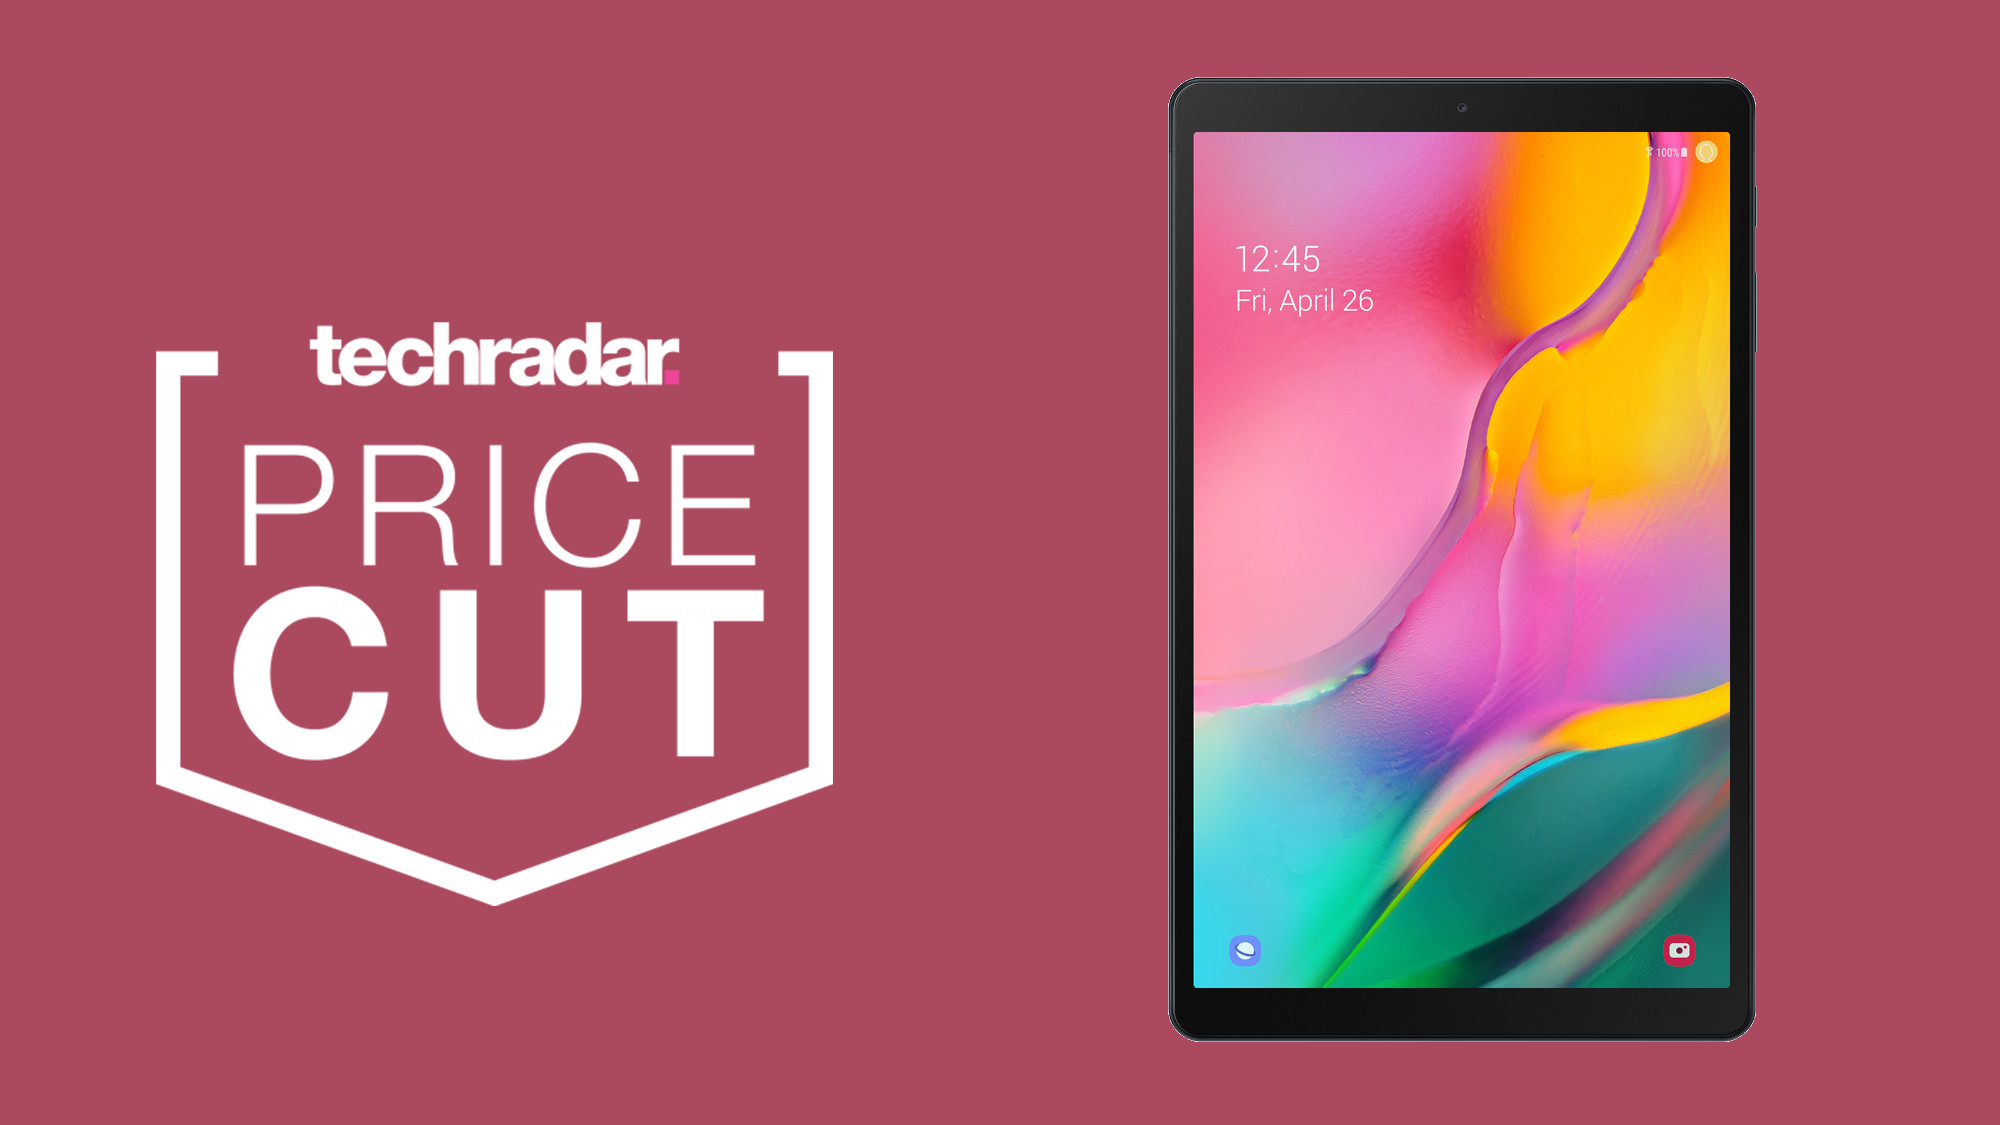 Samsung Galaxy tablets are on sale now in Amazon's early Black Friday